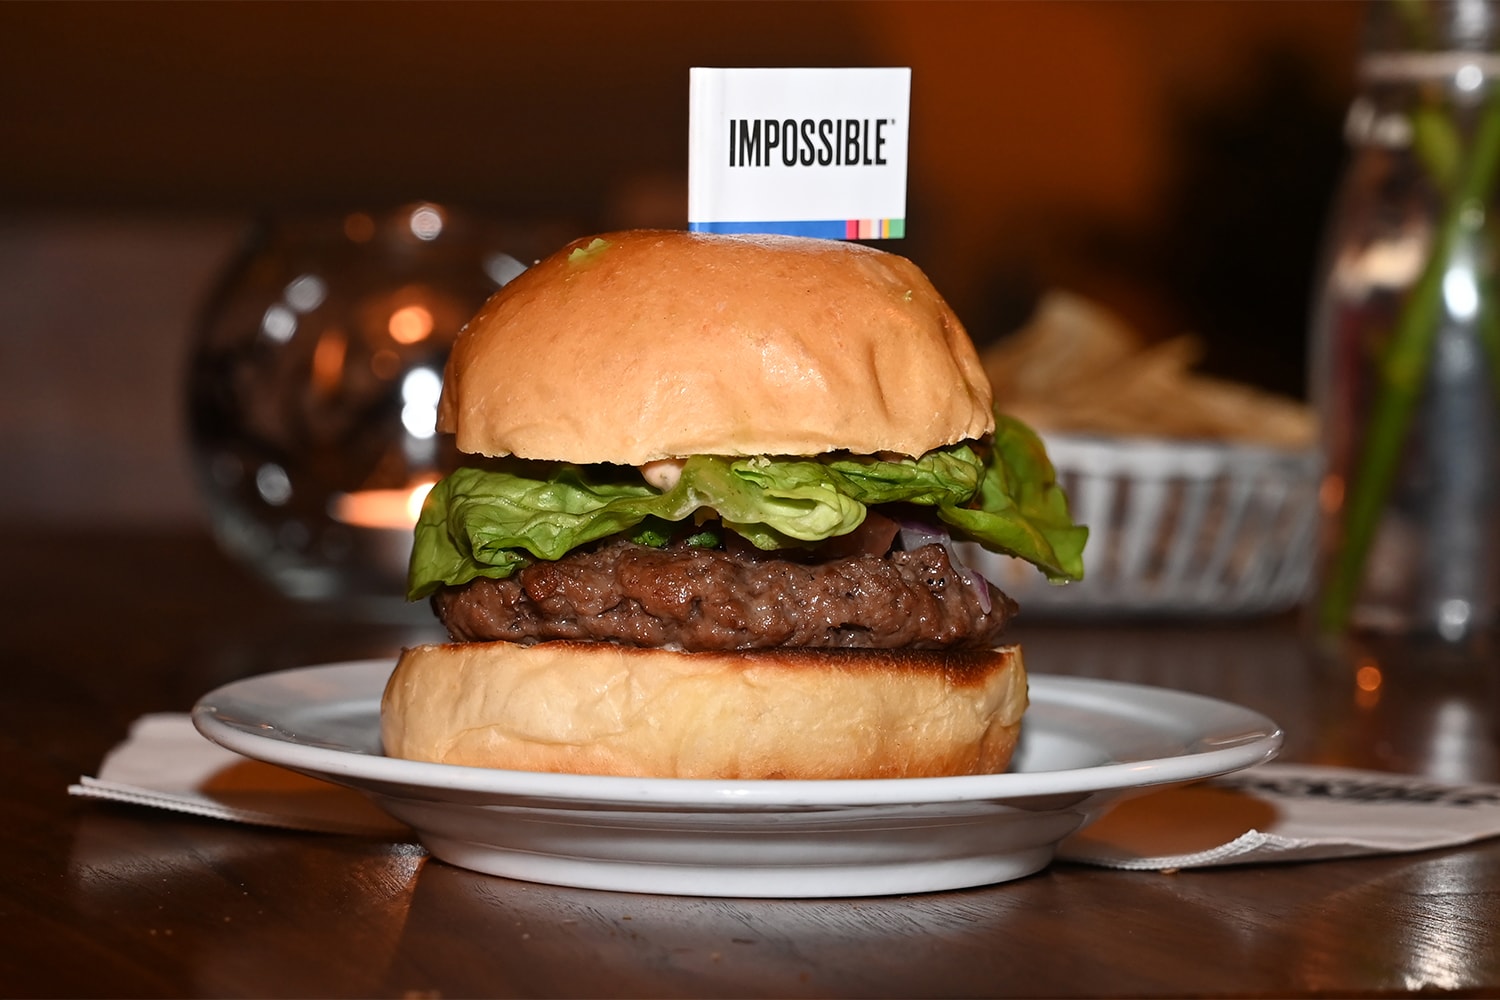 Impossible foods Burger Second Gen Announcement food gluten animal free meat free environment soy healthy David Chang